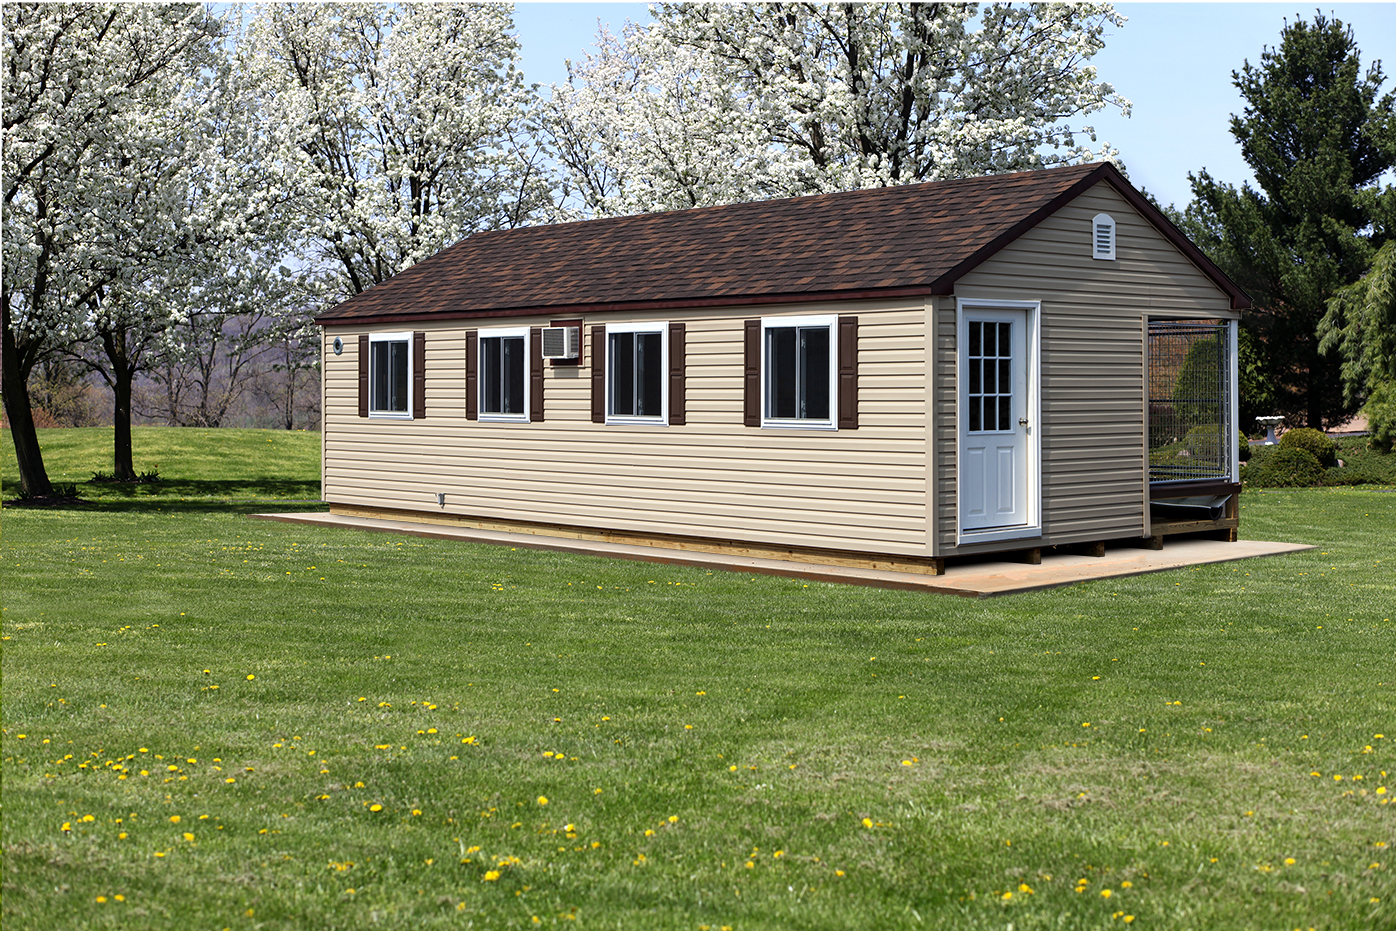 14x32 commercial kennel with 8 dog runs, tan siding, brown roofing, and white trim.